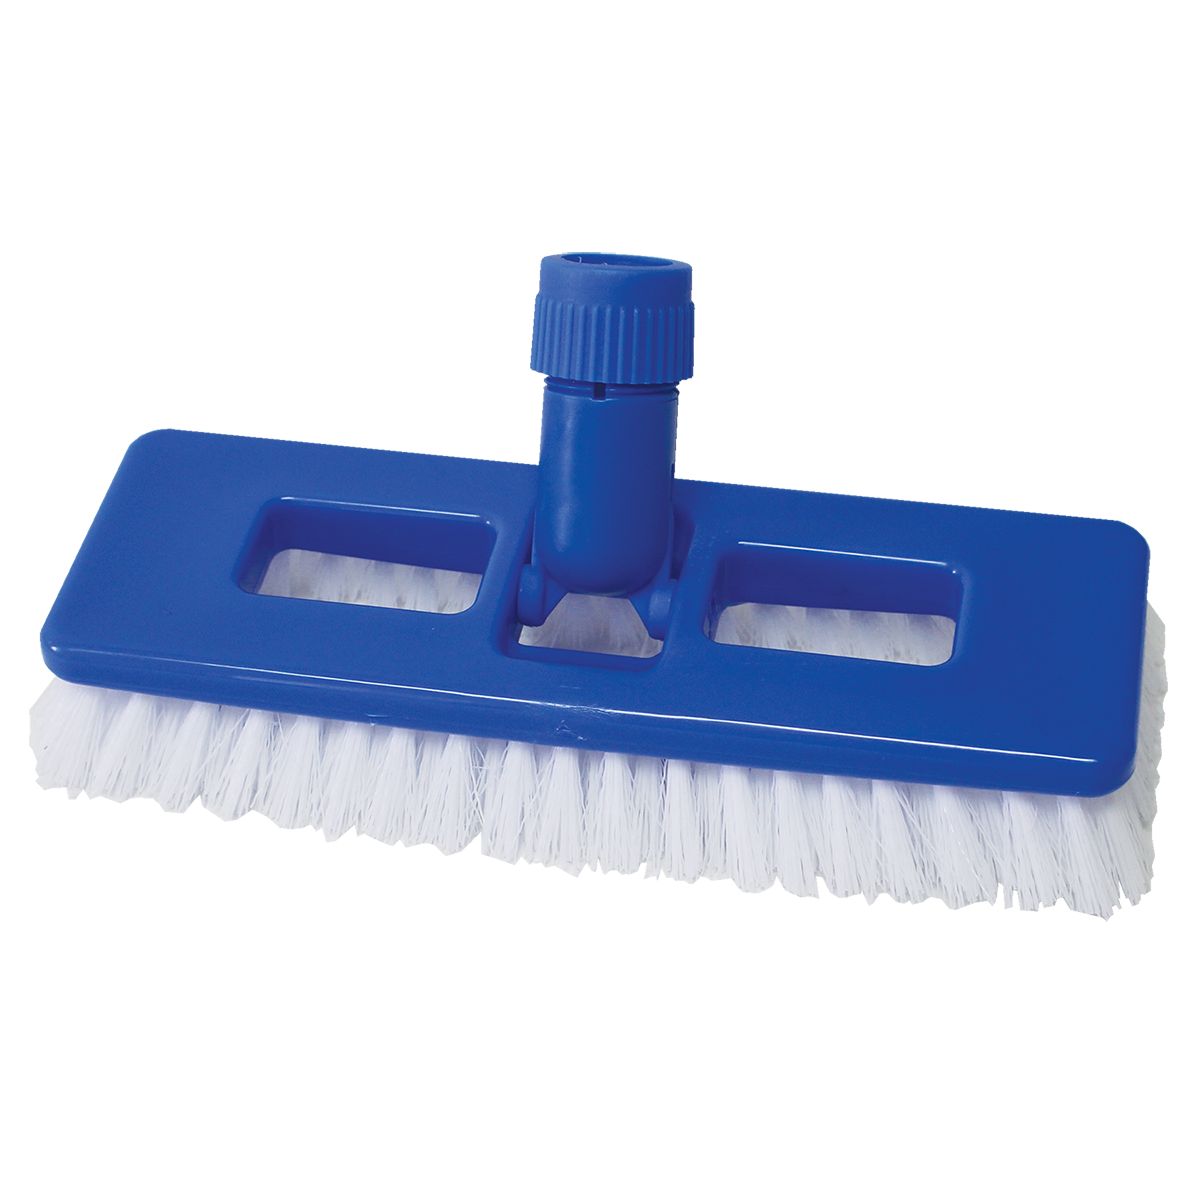 Grout Cleaning Brush, Swivel Corner Cleaning Brush